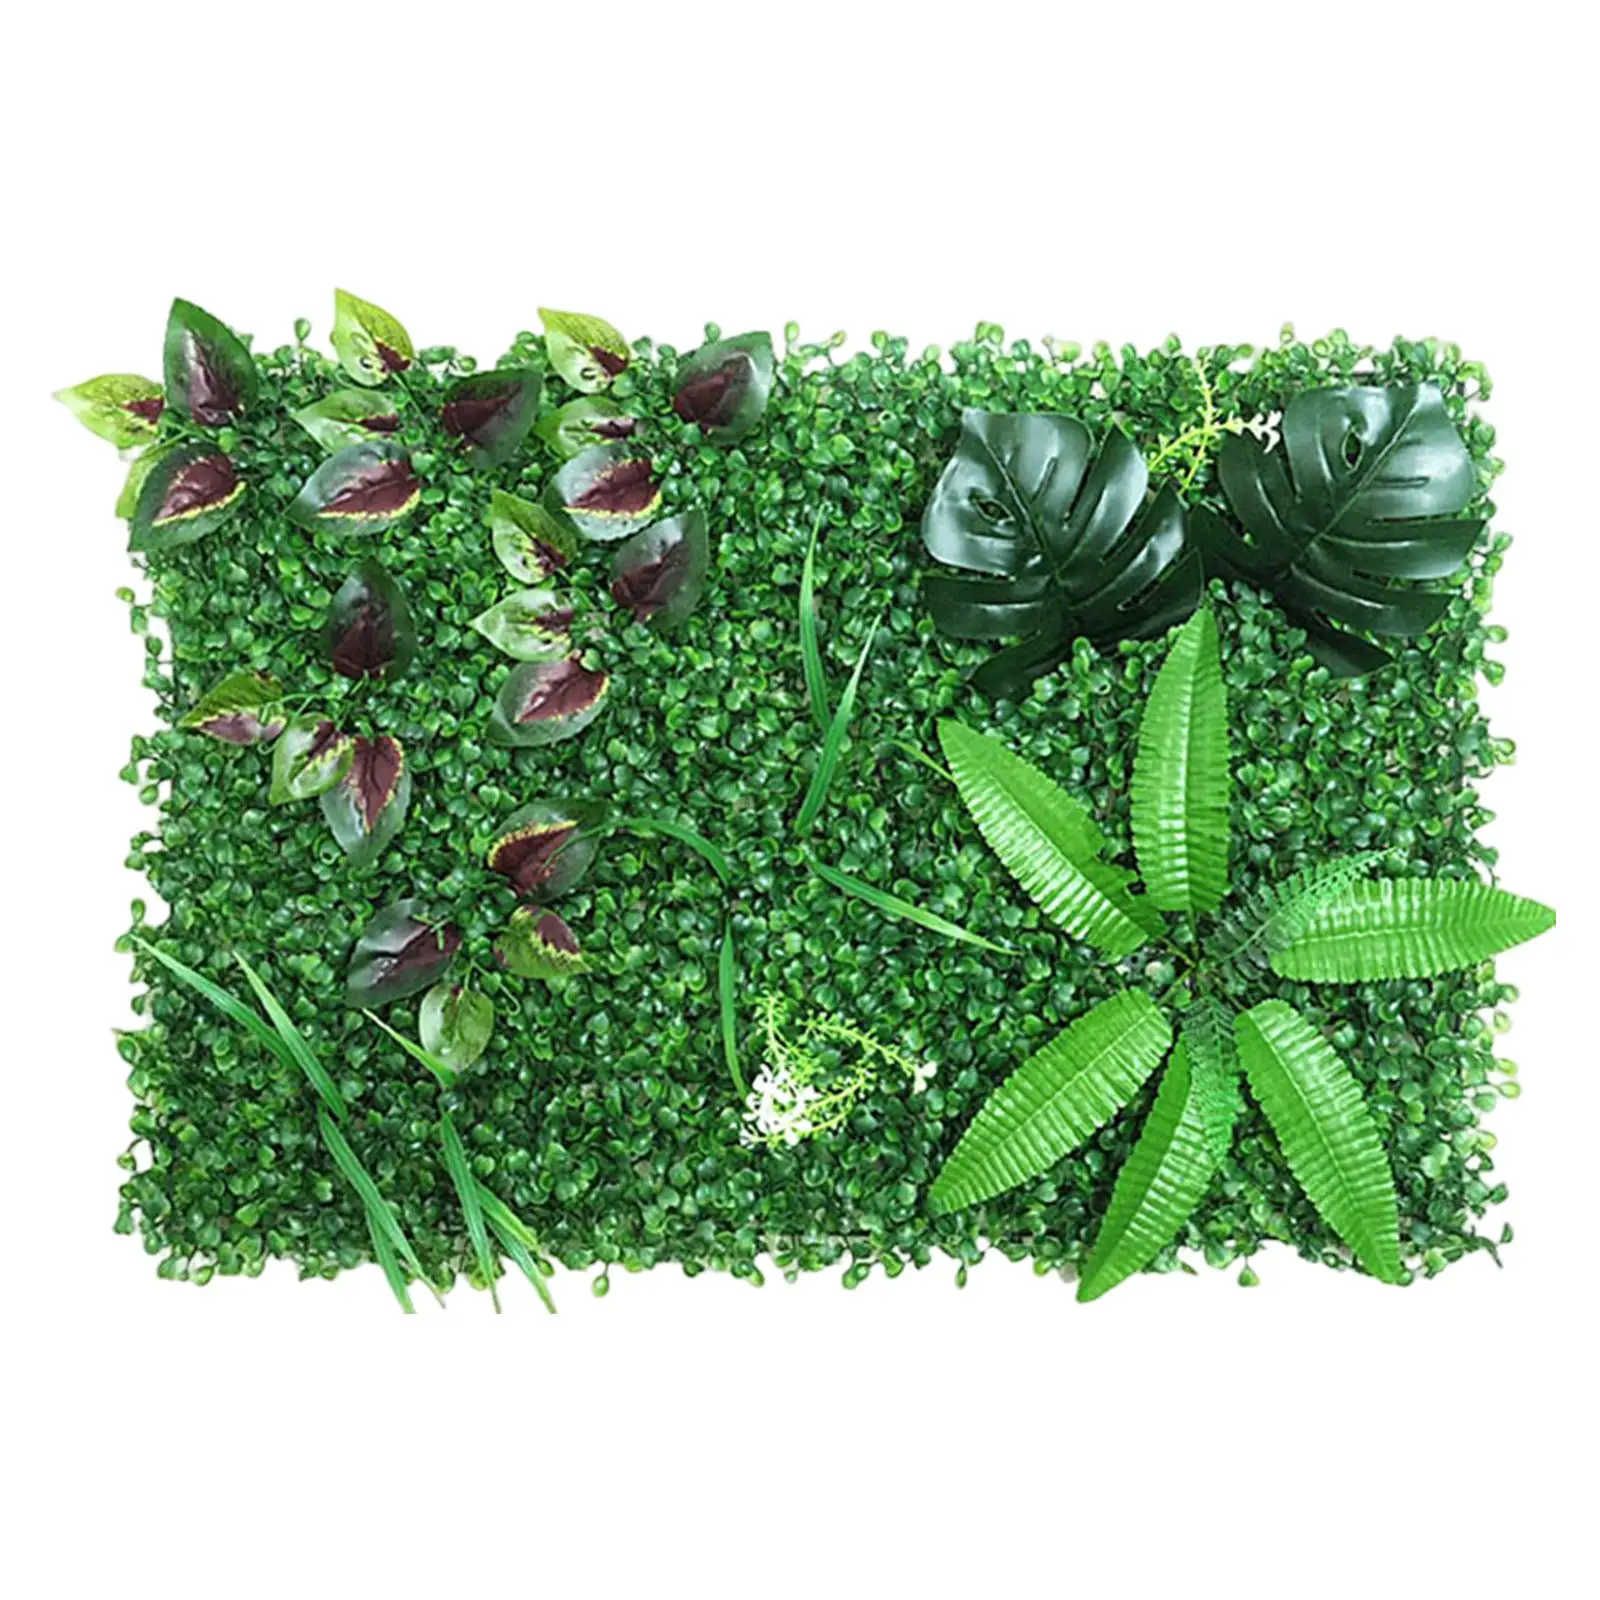 Artificial Green Wall Fake Grass Privacy Fence Screening Wall Decor Plastic Green Leaf Artificial Plants Panel for Home